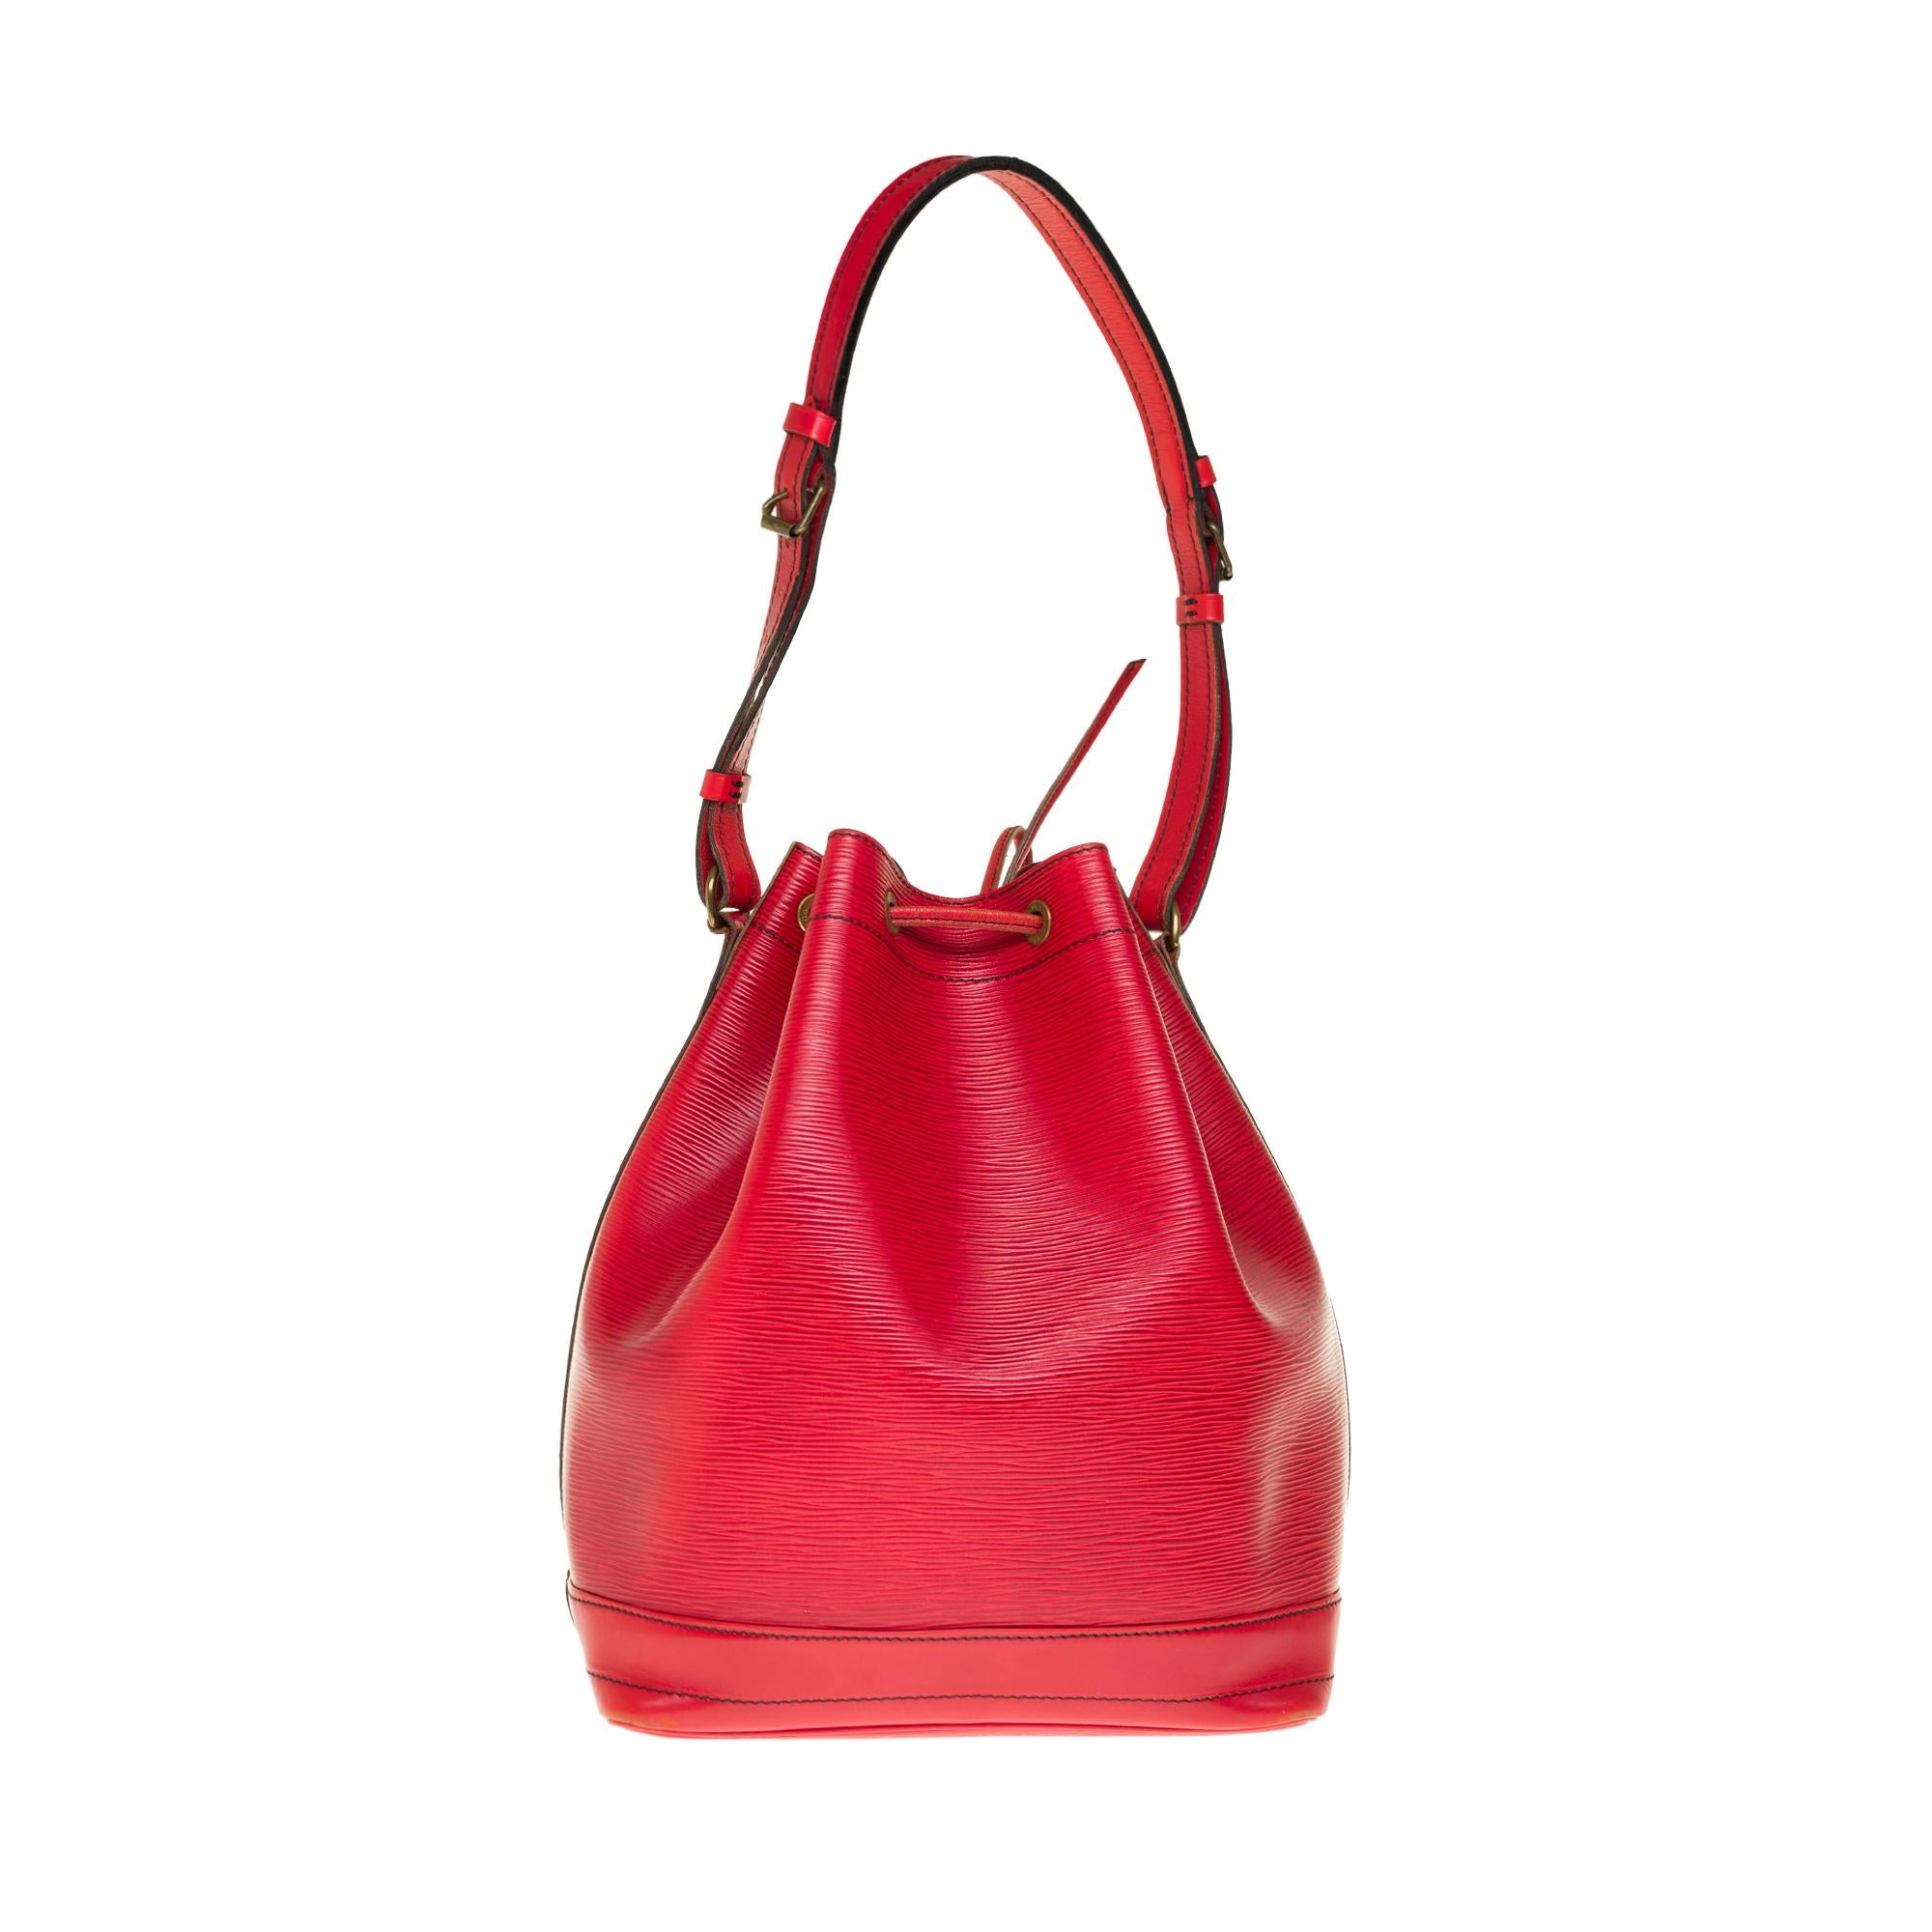 Louis Vuitton Grand Noé handbag in red leather with gold metal trim, a simple adjustable handle in red leather allowing a hand or shoulder support.

Leather tie closure.
Lining in red suedine..
Signature: 